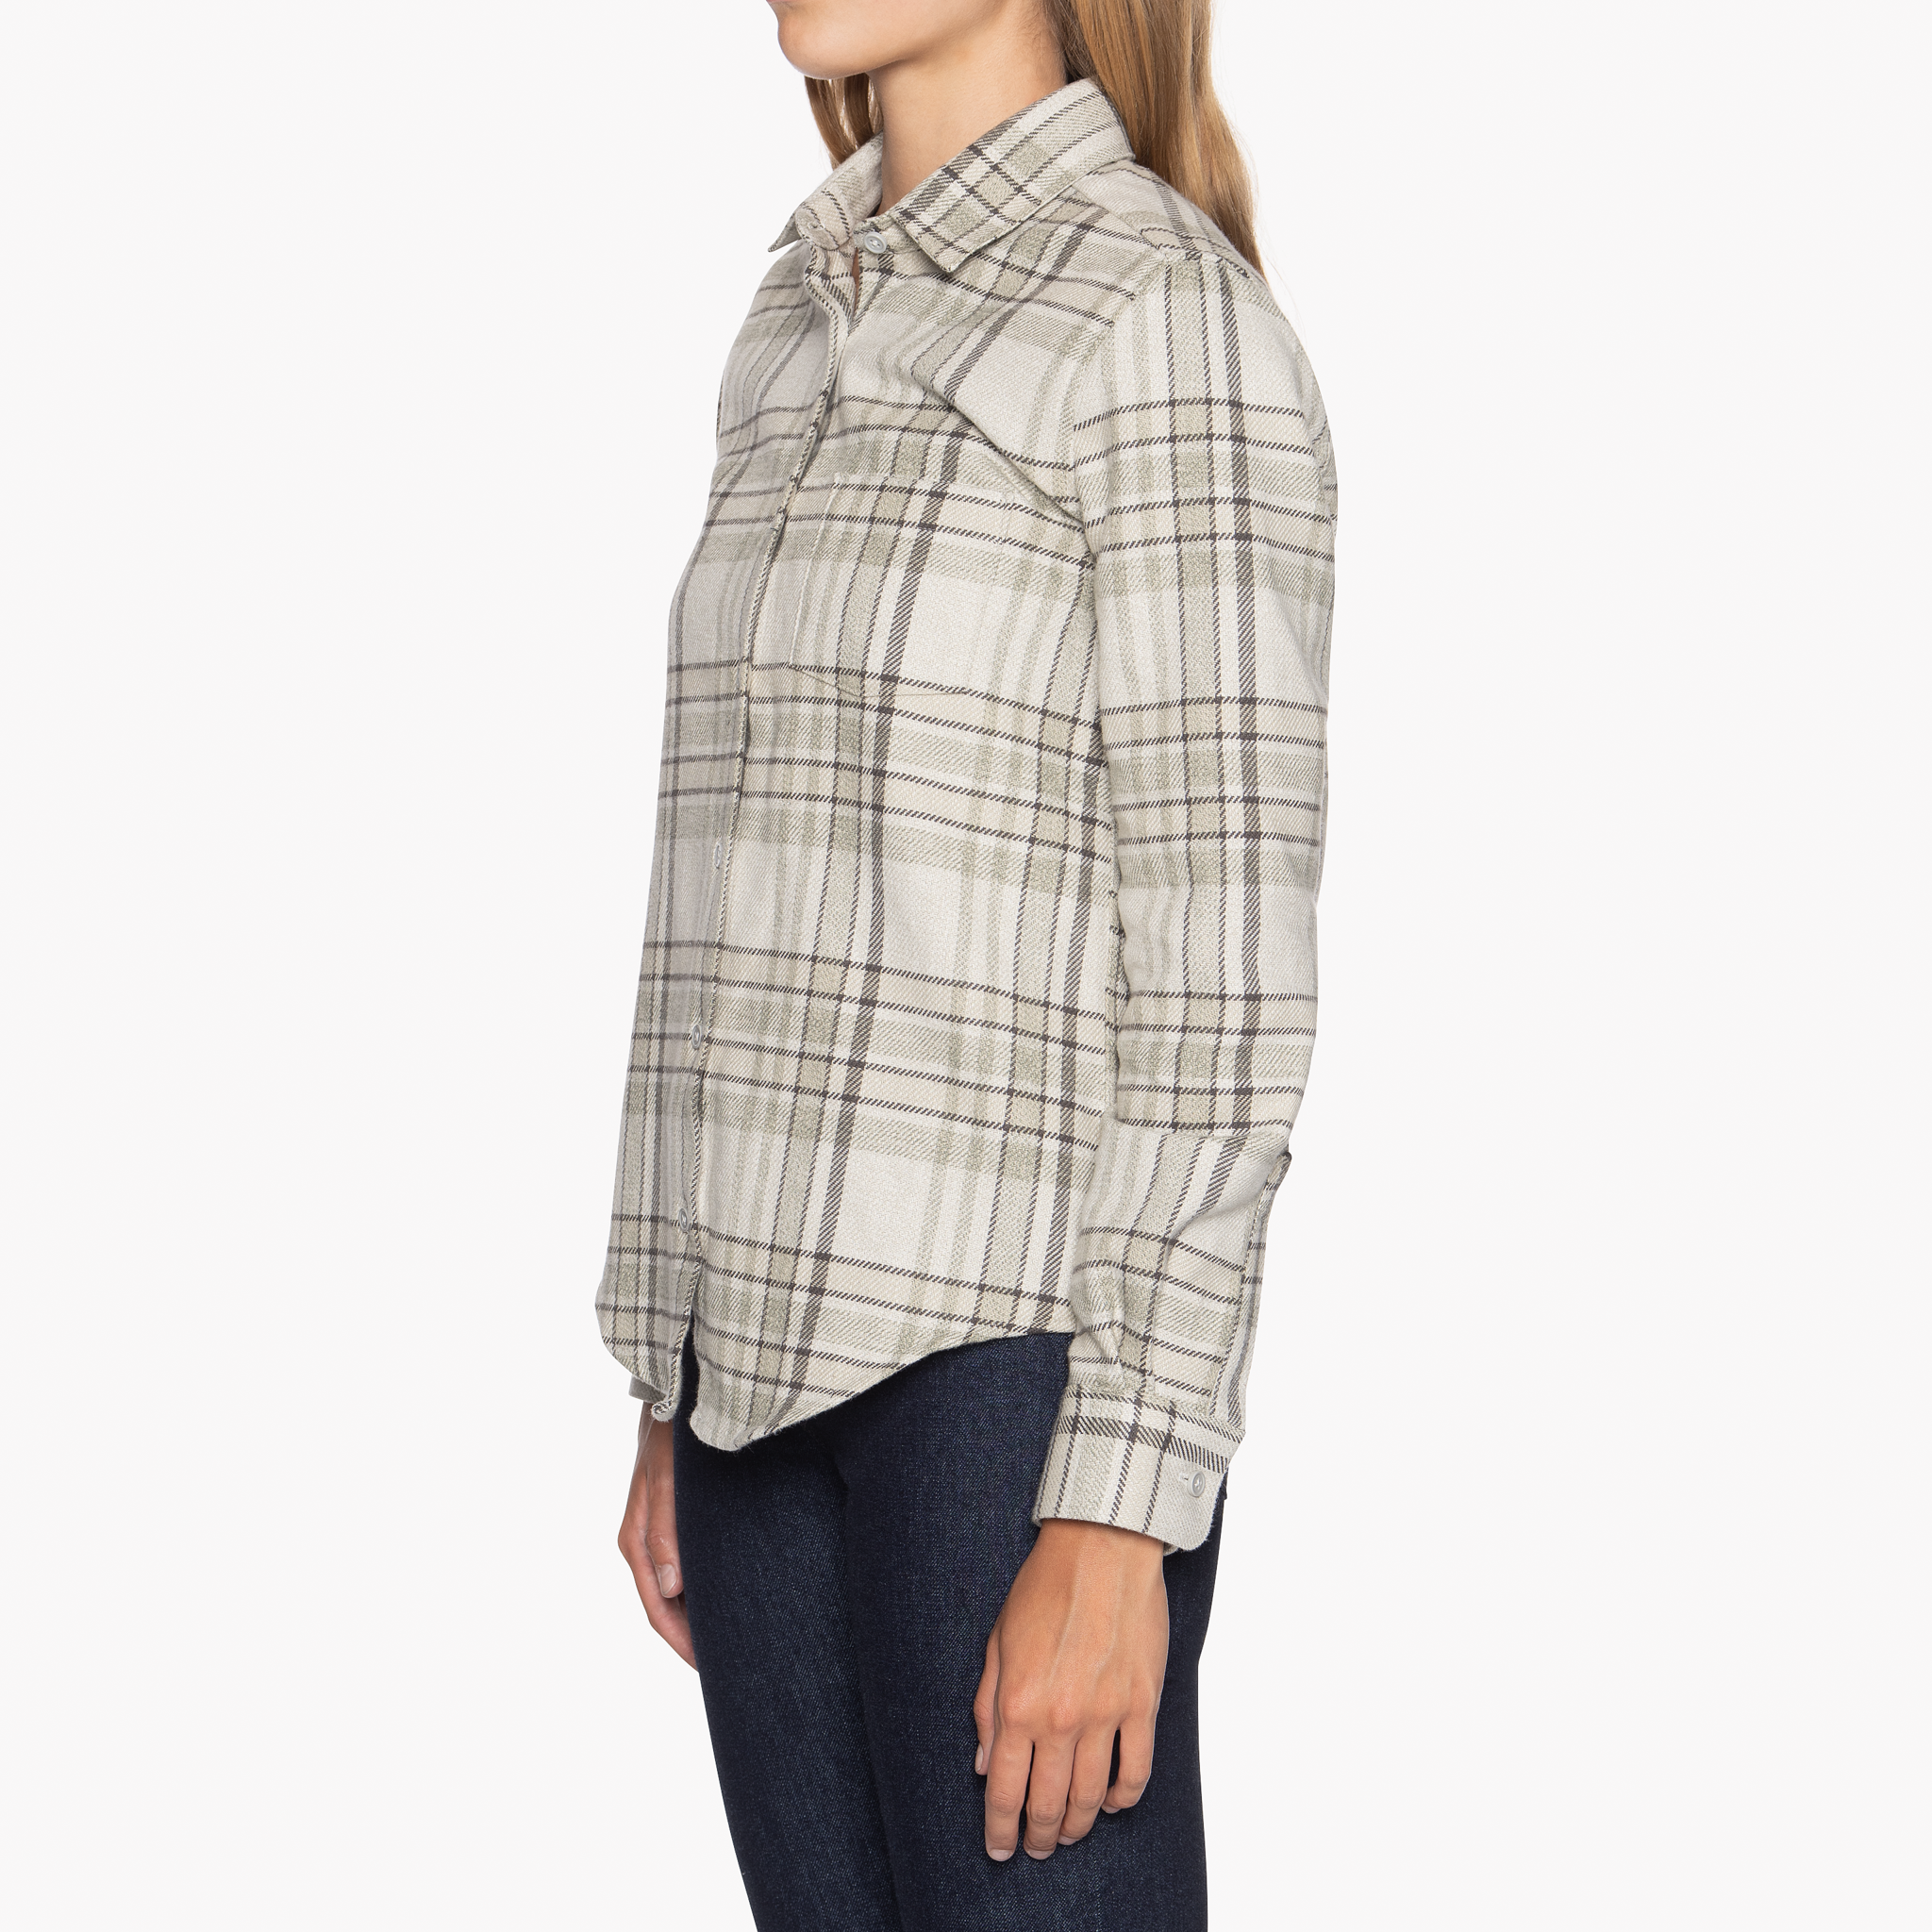  Women’s Country Shirt - Heavy Vintage Flannel - Pale Grey - side 